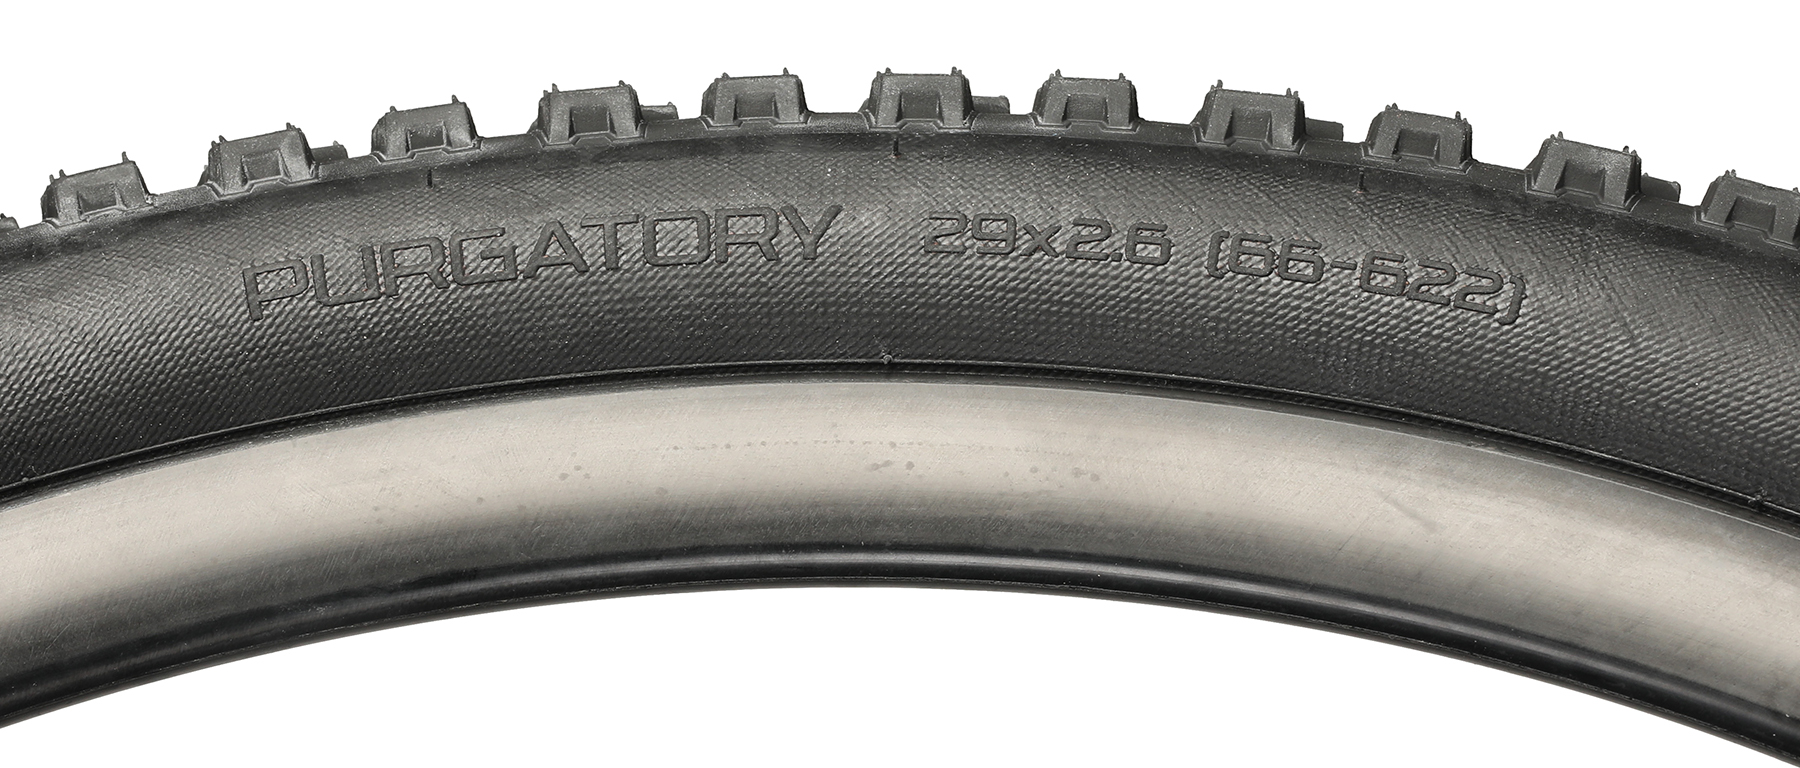 Specialized Purgatory GRID 2Bliss Ready Tire